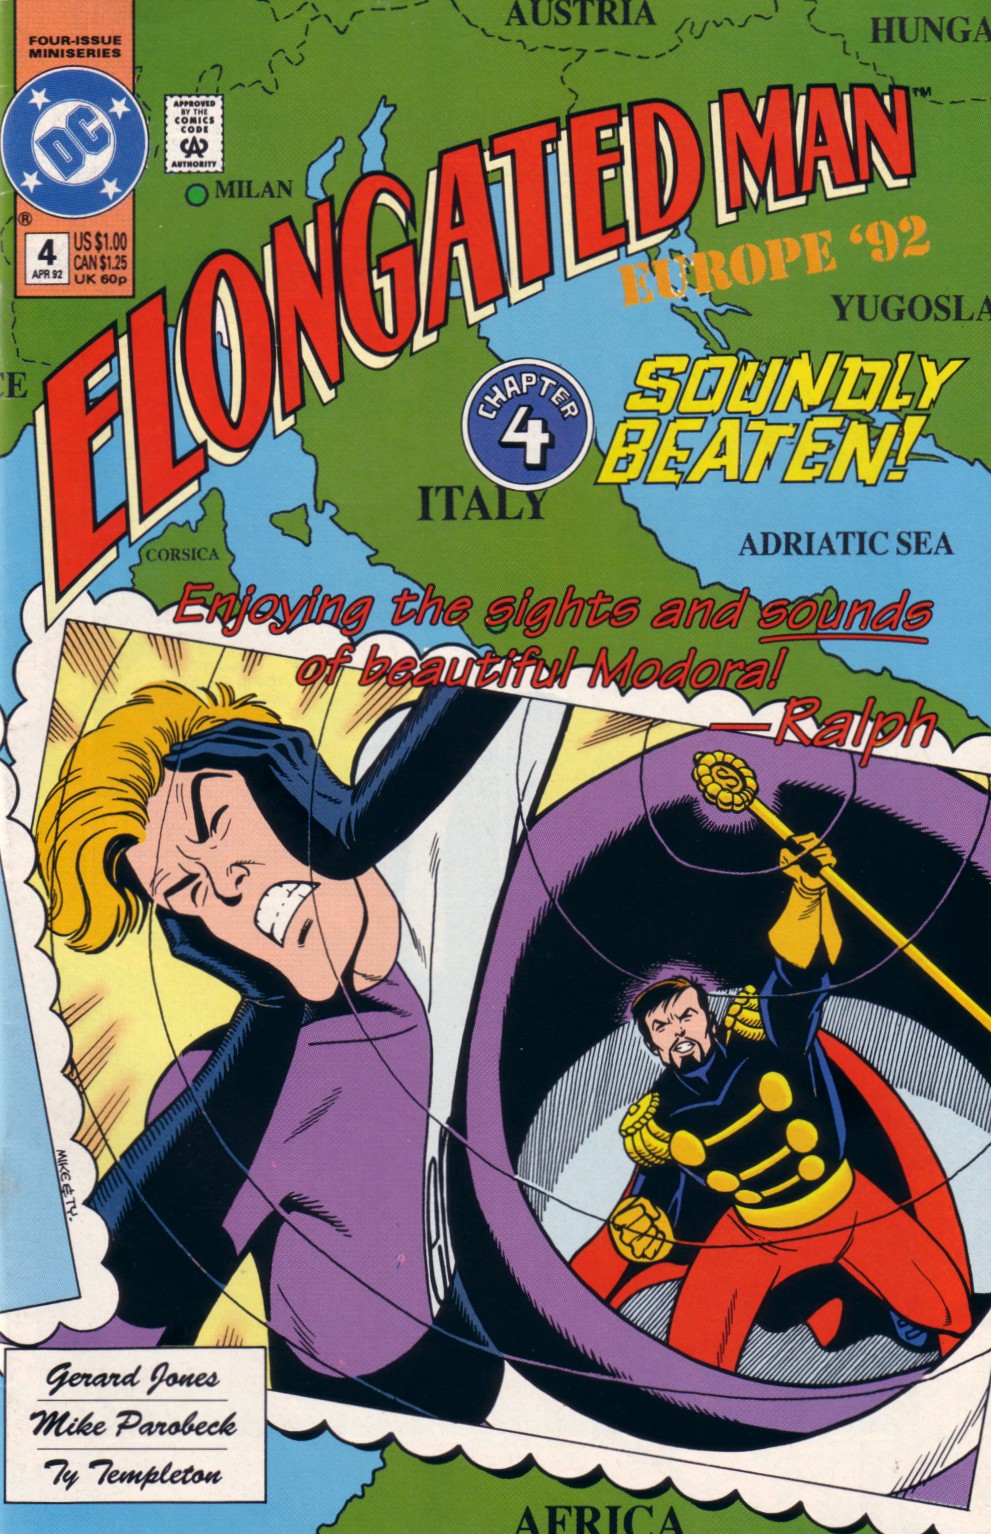 Read online Elongated Man comic -  Issue #4 - 1